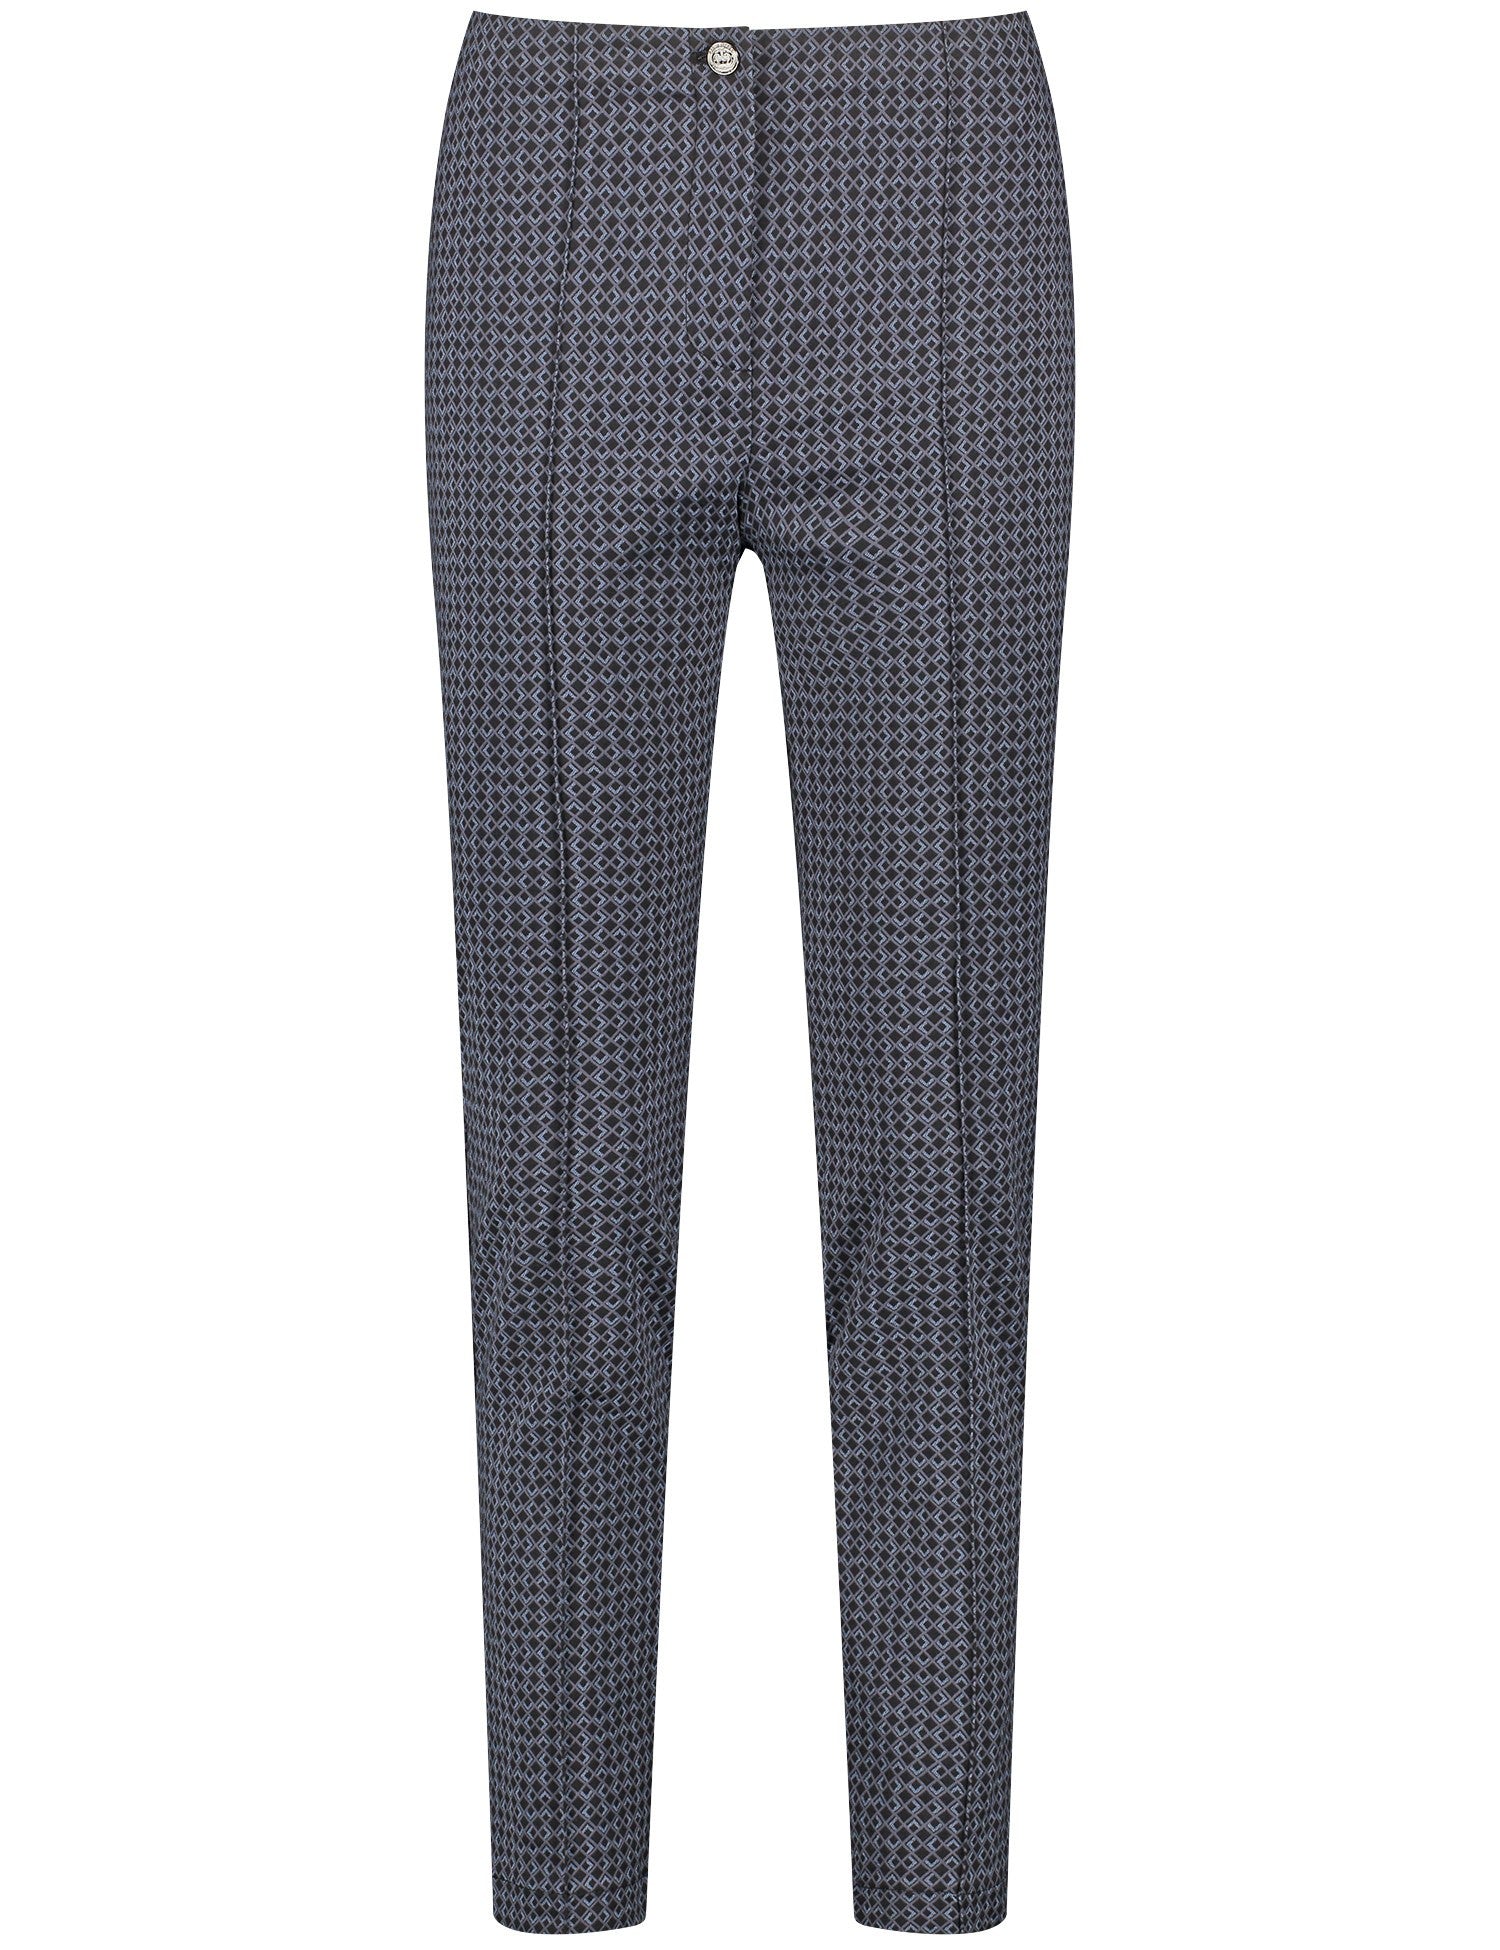 Gerry Weber Patterned Trousers